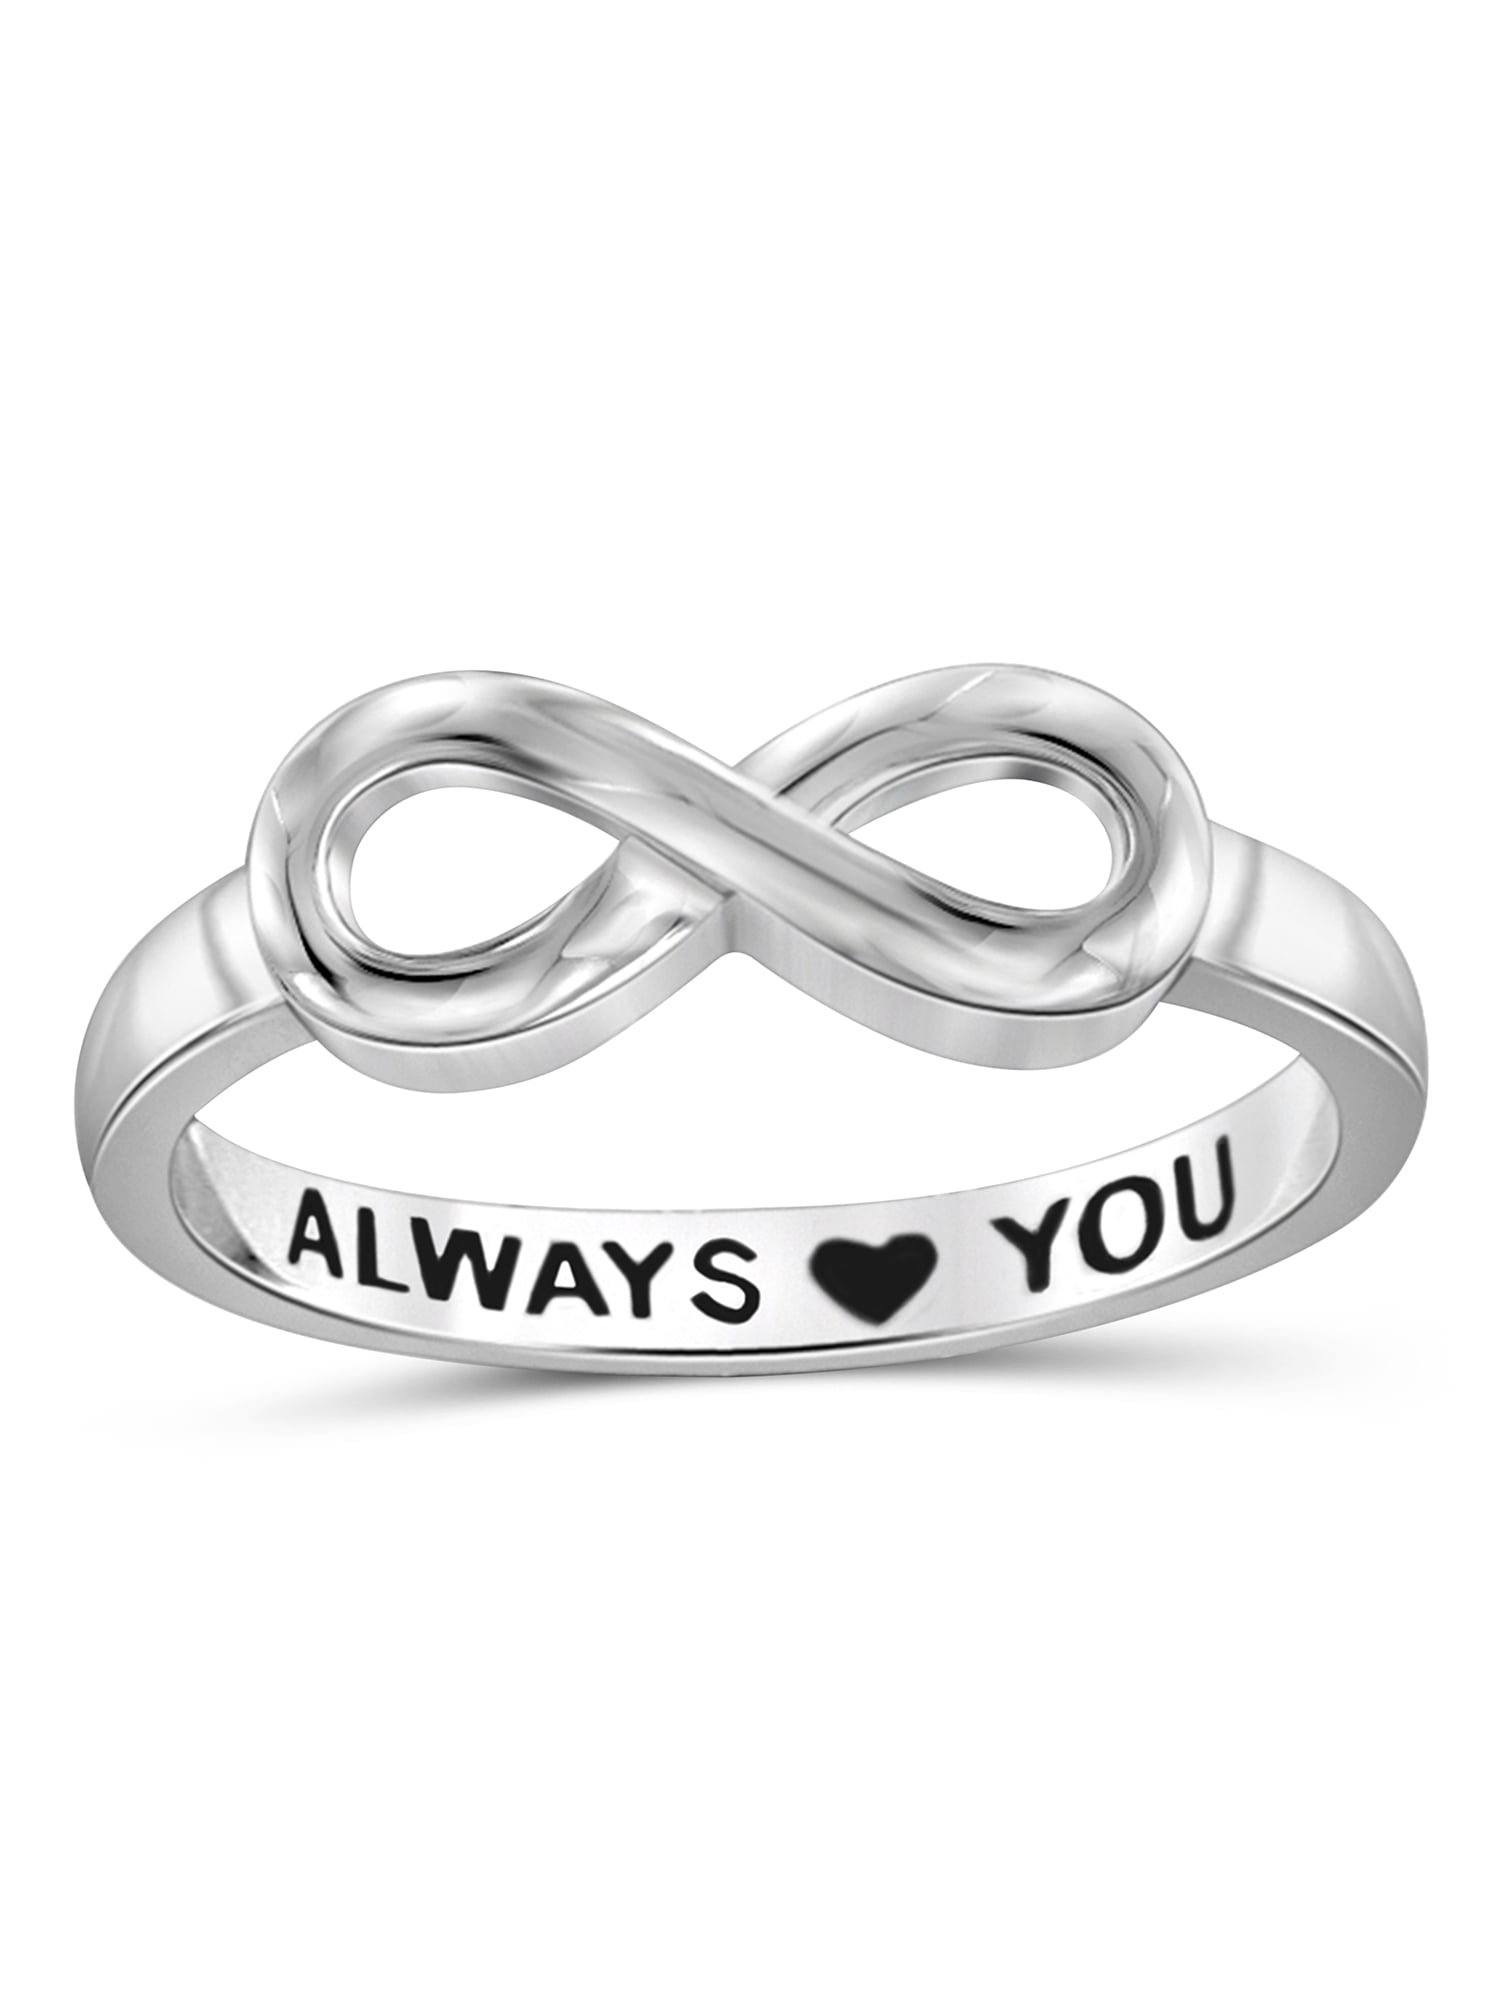 JewelersClub 0.925 Sterling Silver Infinity Friendship Ring for Women |  Personalized BFF Eternity Knot Symbol Band - Walmart.com